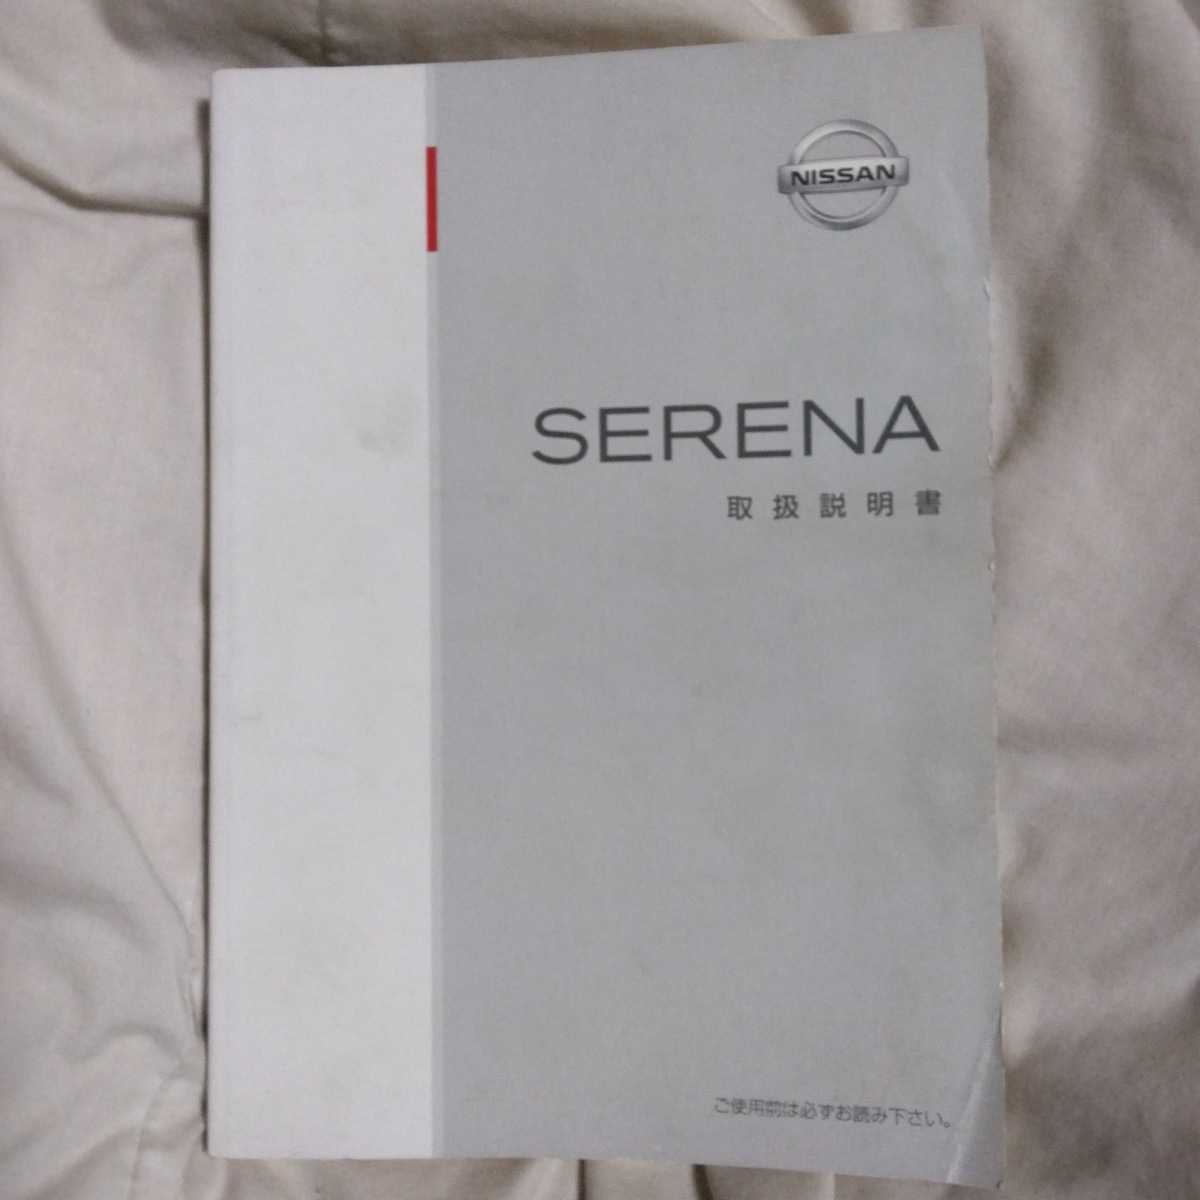  including postage Nissan Serena owner manual manual issue /1999 year / printing /2003 year ( Heisei era 15 year )C24 TC24